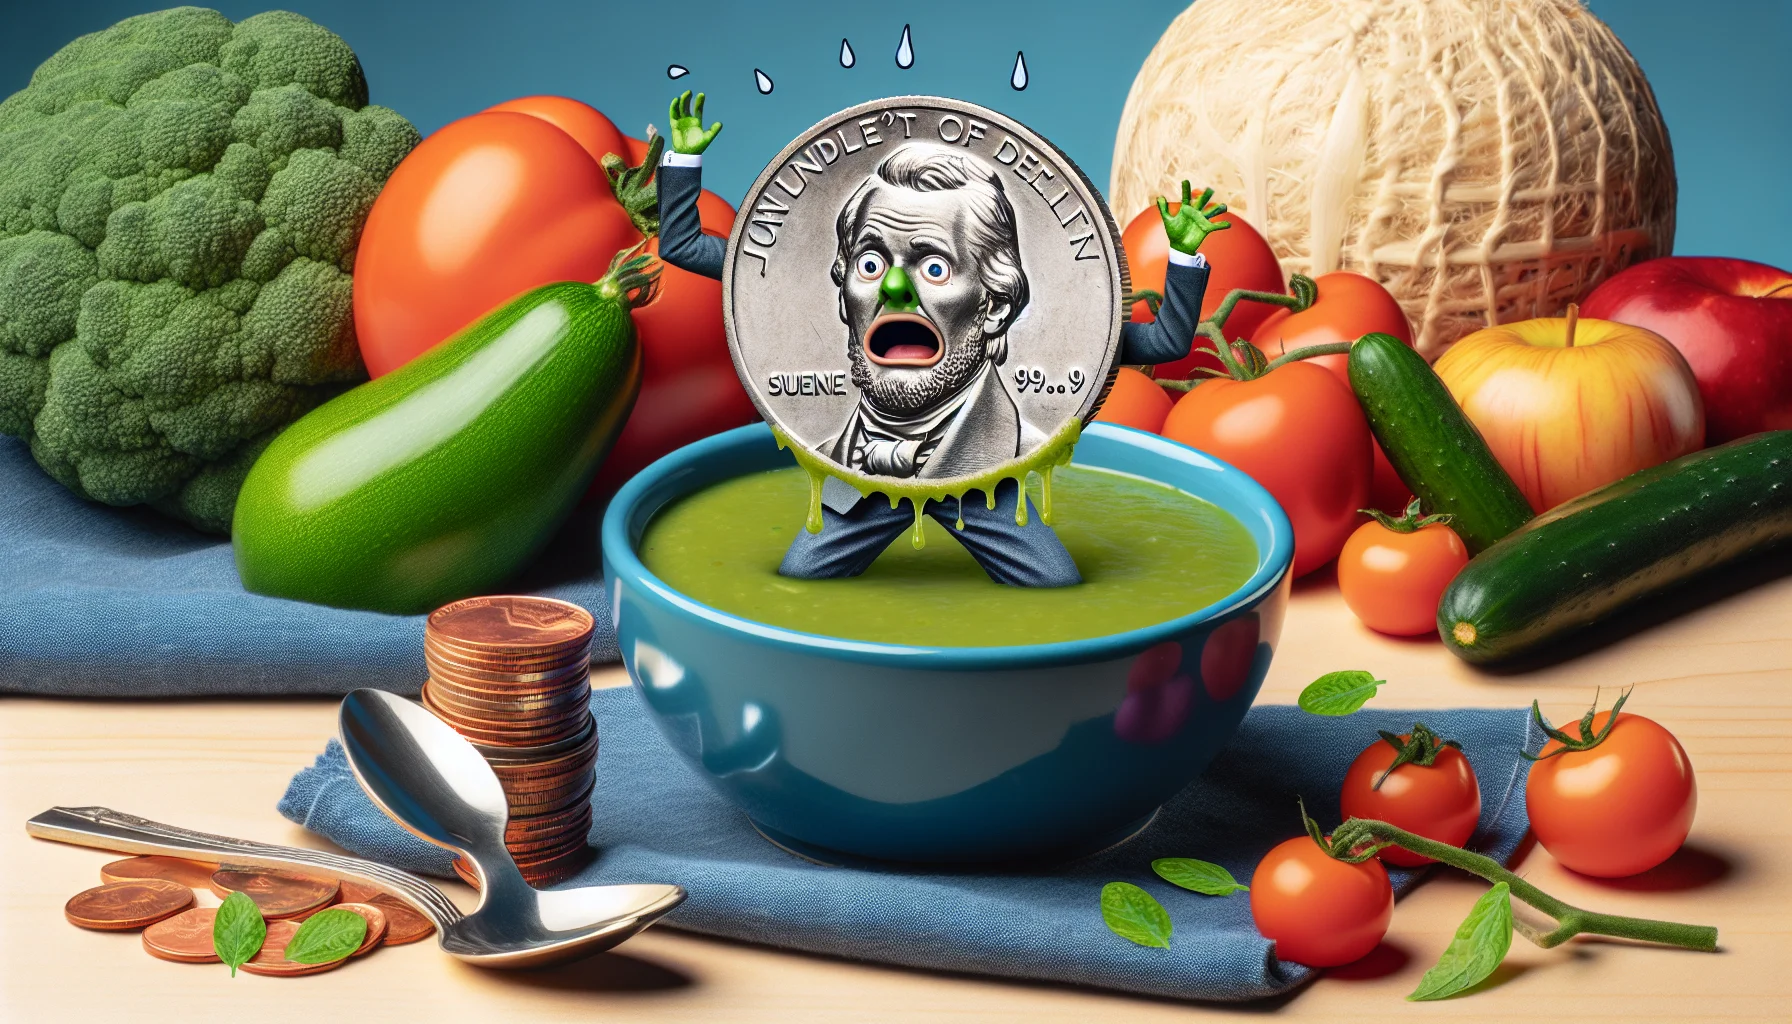 Imagine a humorous, yet realistic food scene featuring a vibrant bowl of green tomato soup. Beside it, a coin, nickel or dime, humorously sweating or gasping at the sight of the soup, showcasing affordability. Around are farmers market style fruits and vegetables indicating a healthy environment. The overall scenario triggers the notion of eating healthy for less, inspiring every viewer to consider this frugal yet healthy dining choice.